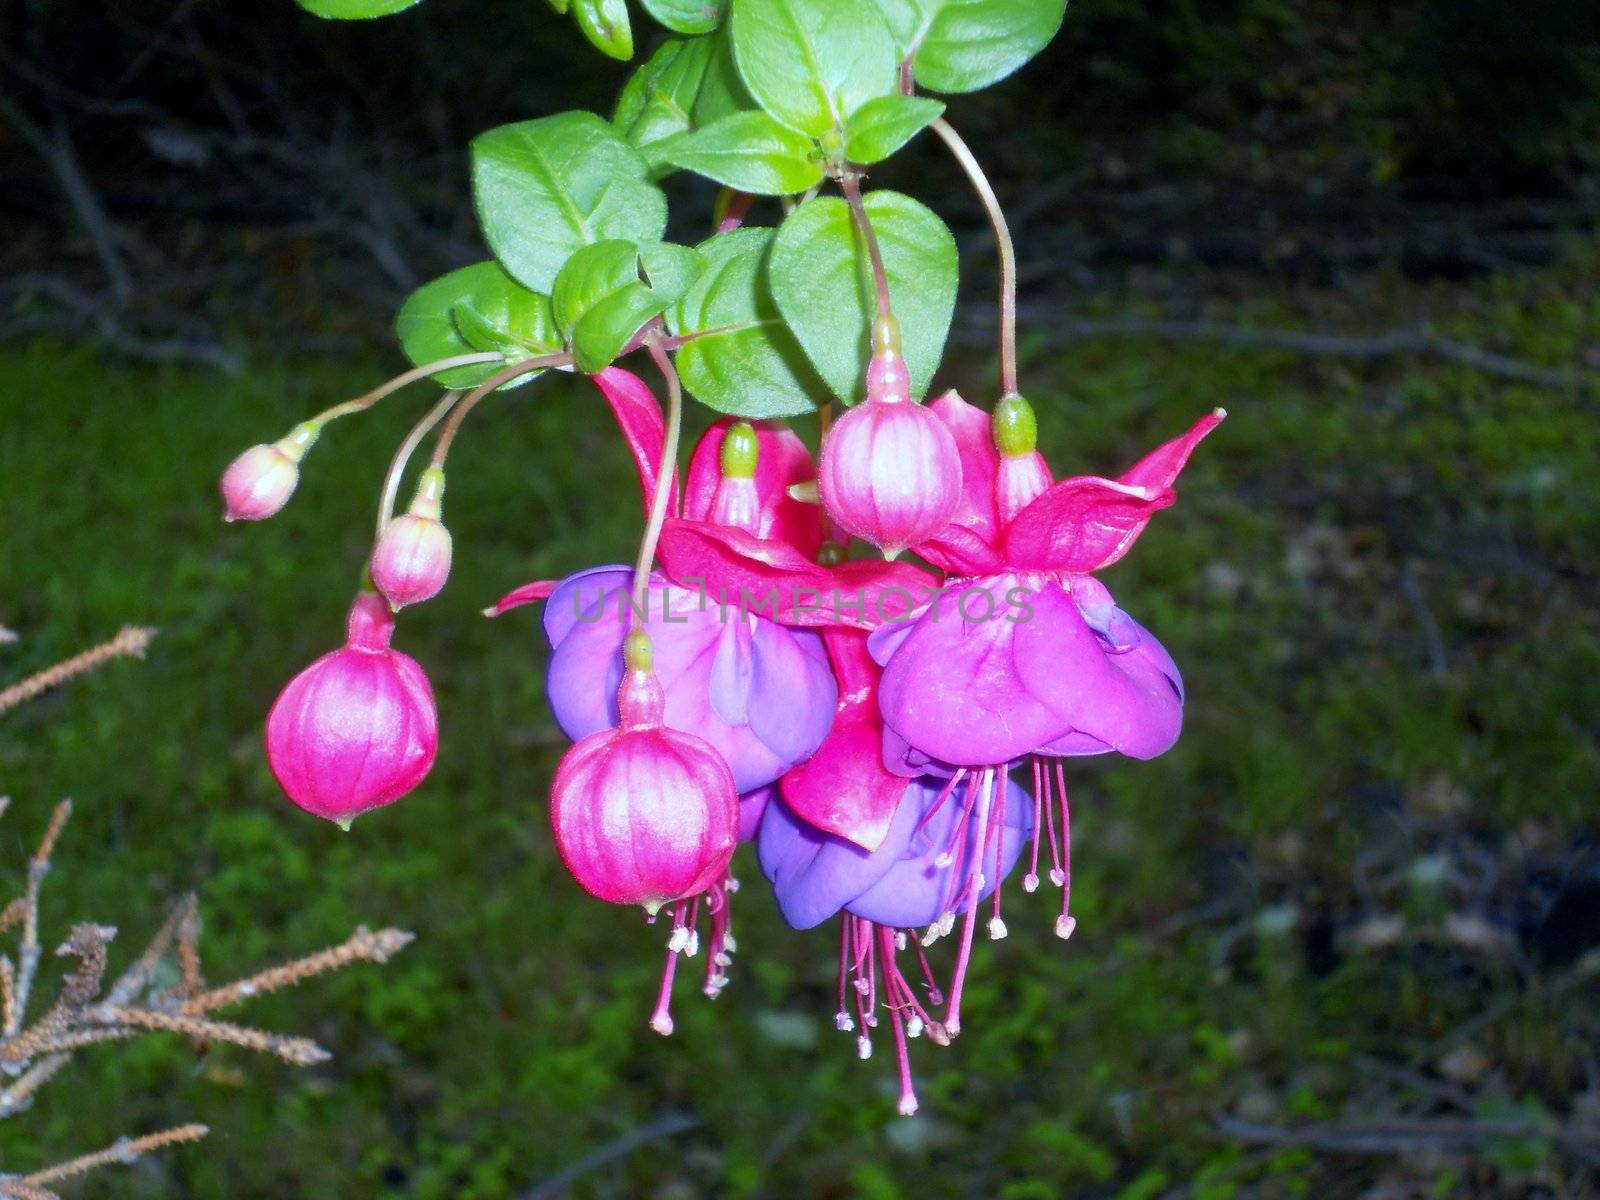 Known for their pinks and purples, Fuschias are sub-tropical flowering plants that originated in New Zealand and live year round in the deep south of the United States and are grown as annuals farther north.